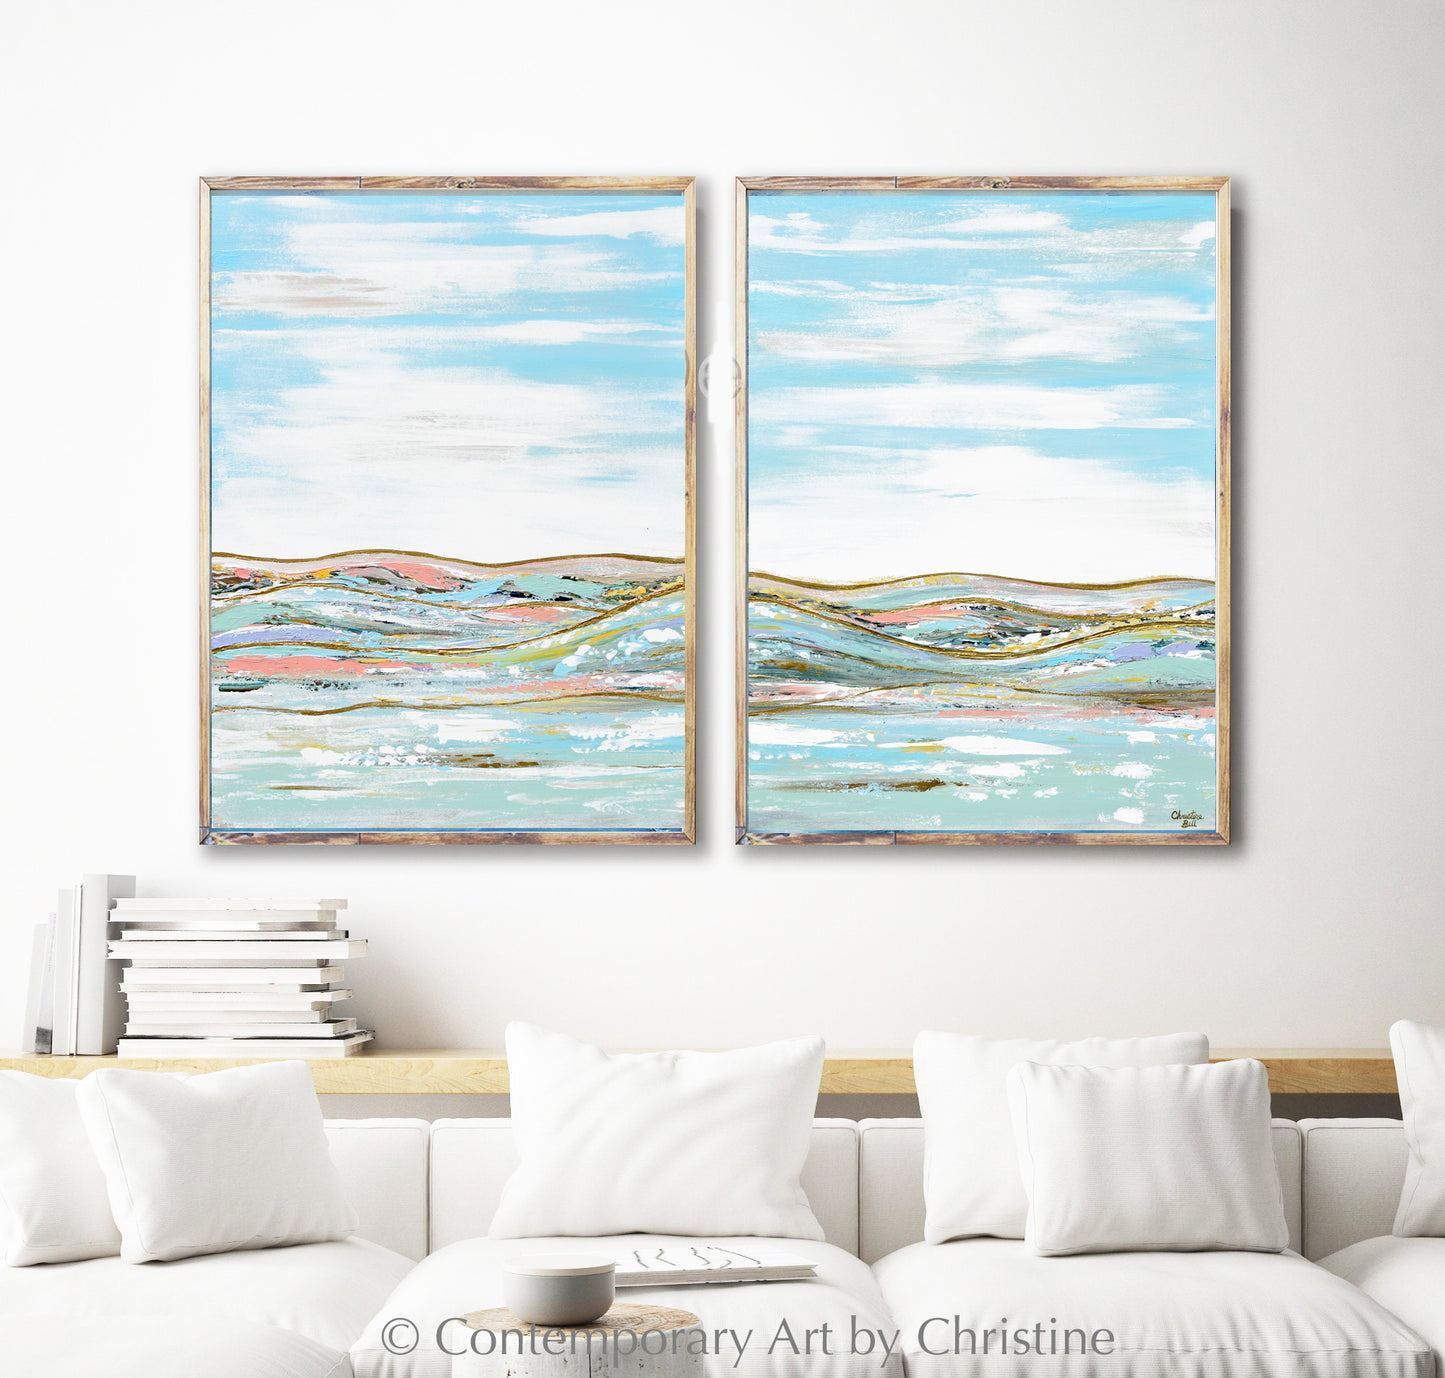 "Heavenly Day I" GICLEE PRINT Art Abstract Landscape Painting Diptych, Light Blue, Mint, Gold Expressionist Palette Knife